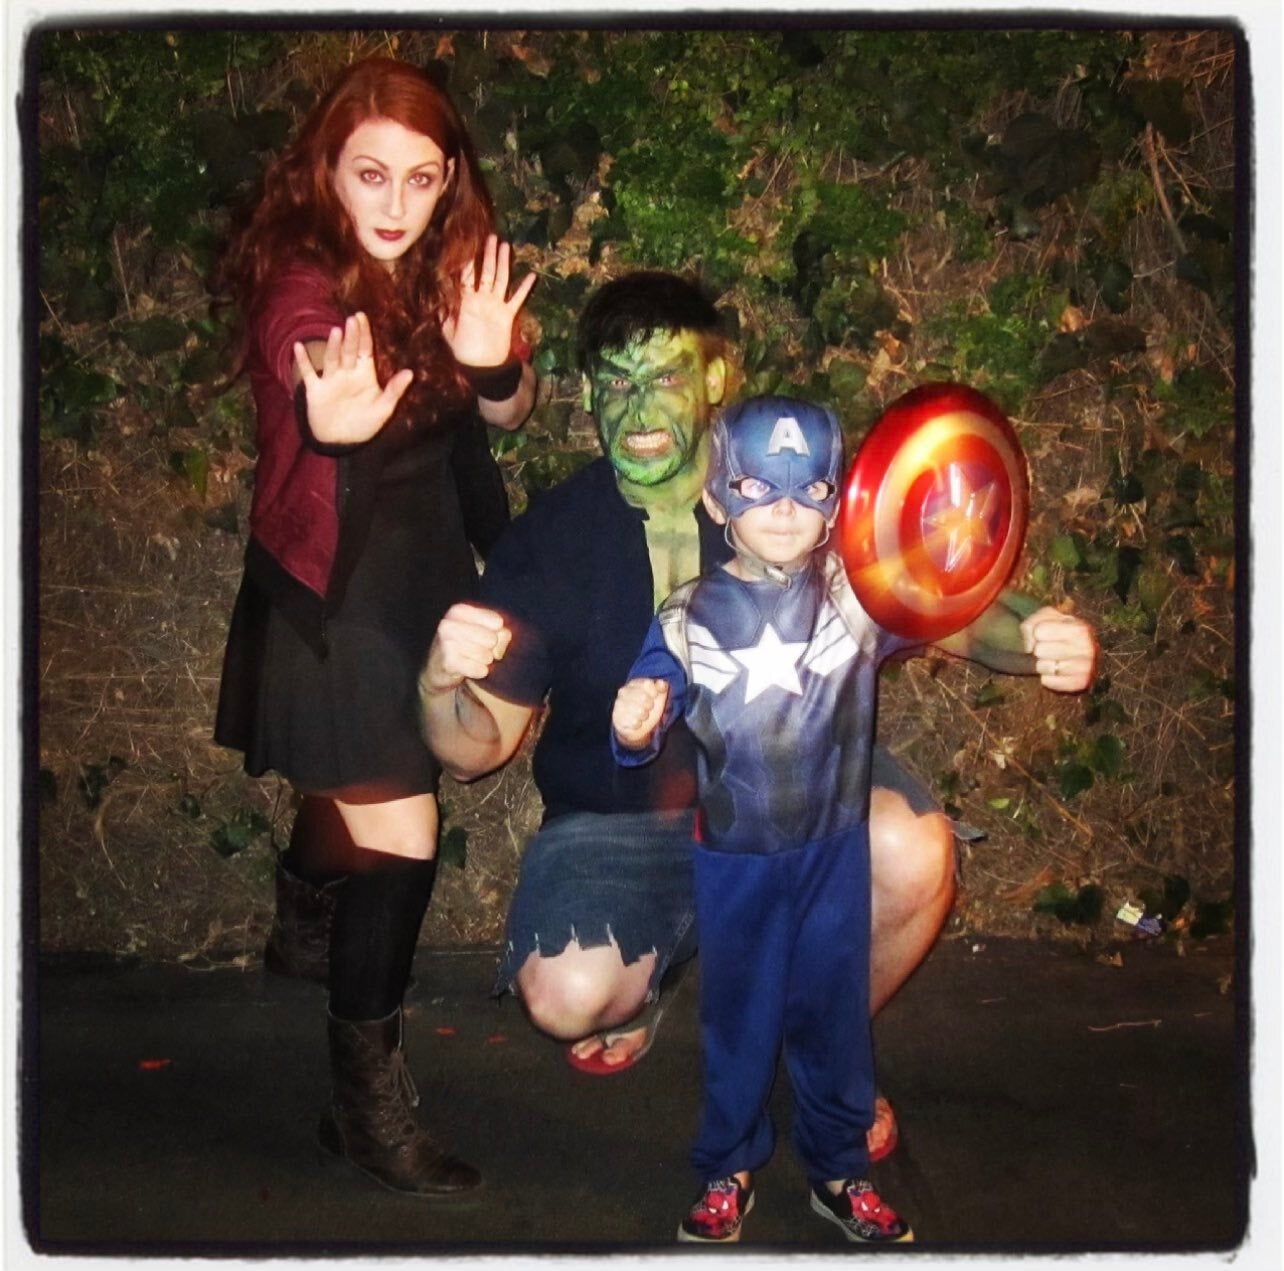 Julian Hilliard dressed as Captain America, Justin Hilliard (father) as the Hulk, and Arianne Martin (mother) as Wanda